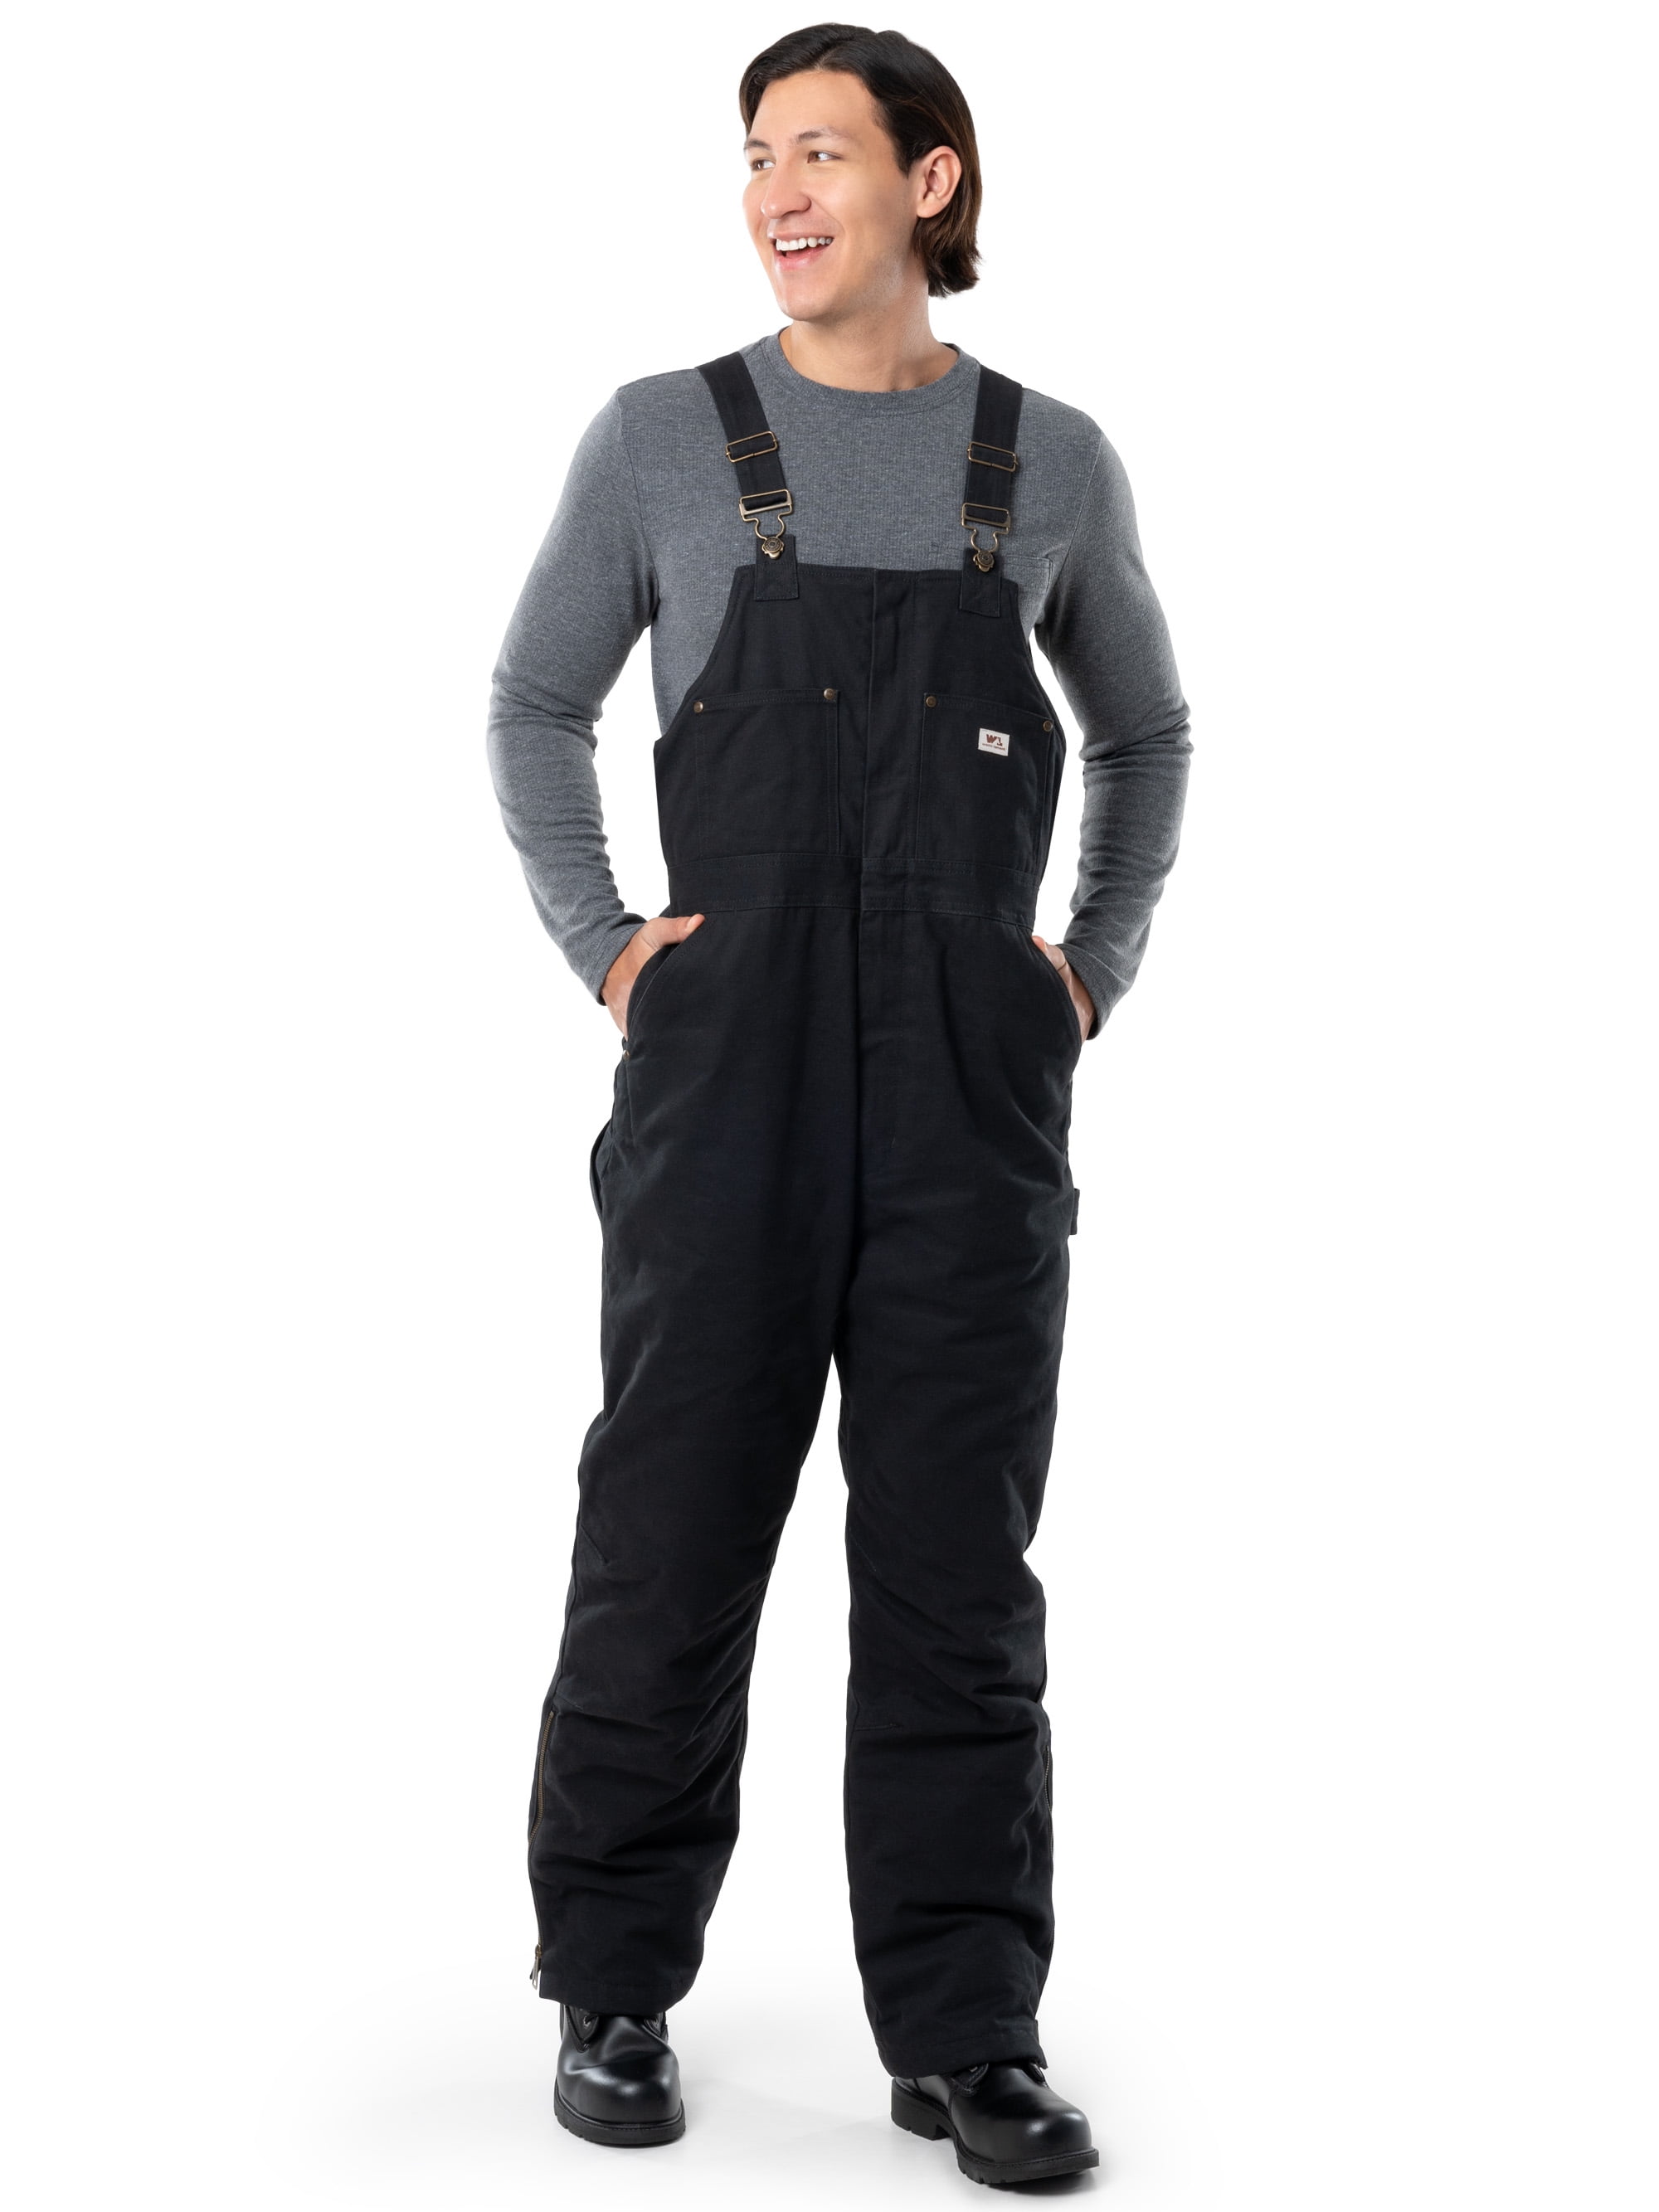  Men's Work Utility & Safety Overalls & Coveralls - Carhartt /  3XL / Men's Work U: Clothing, Shoes & Jewelry